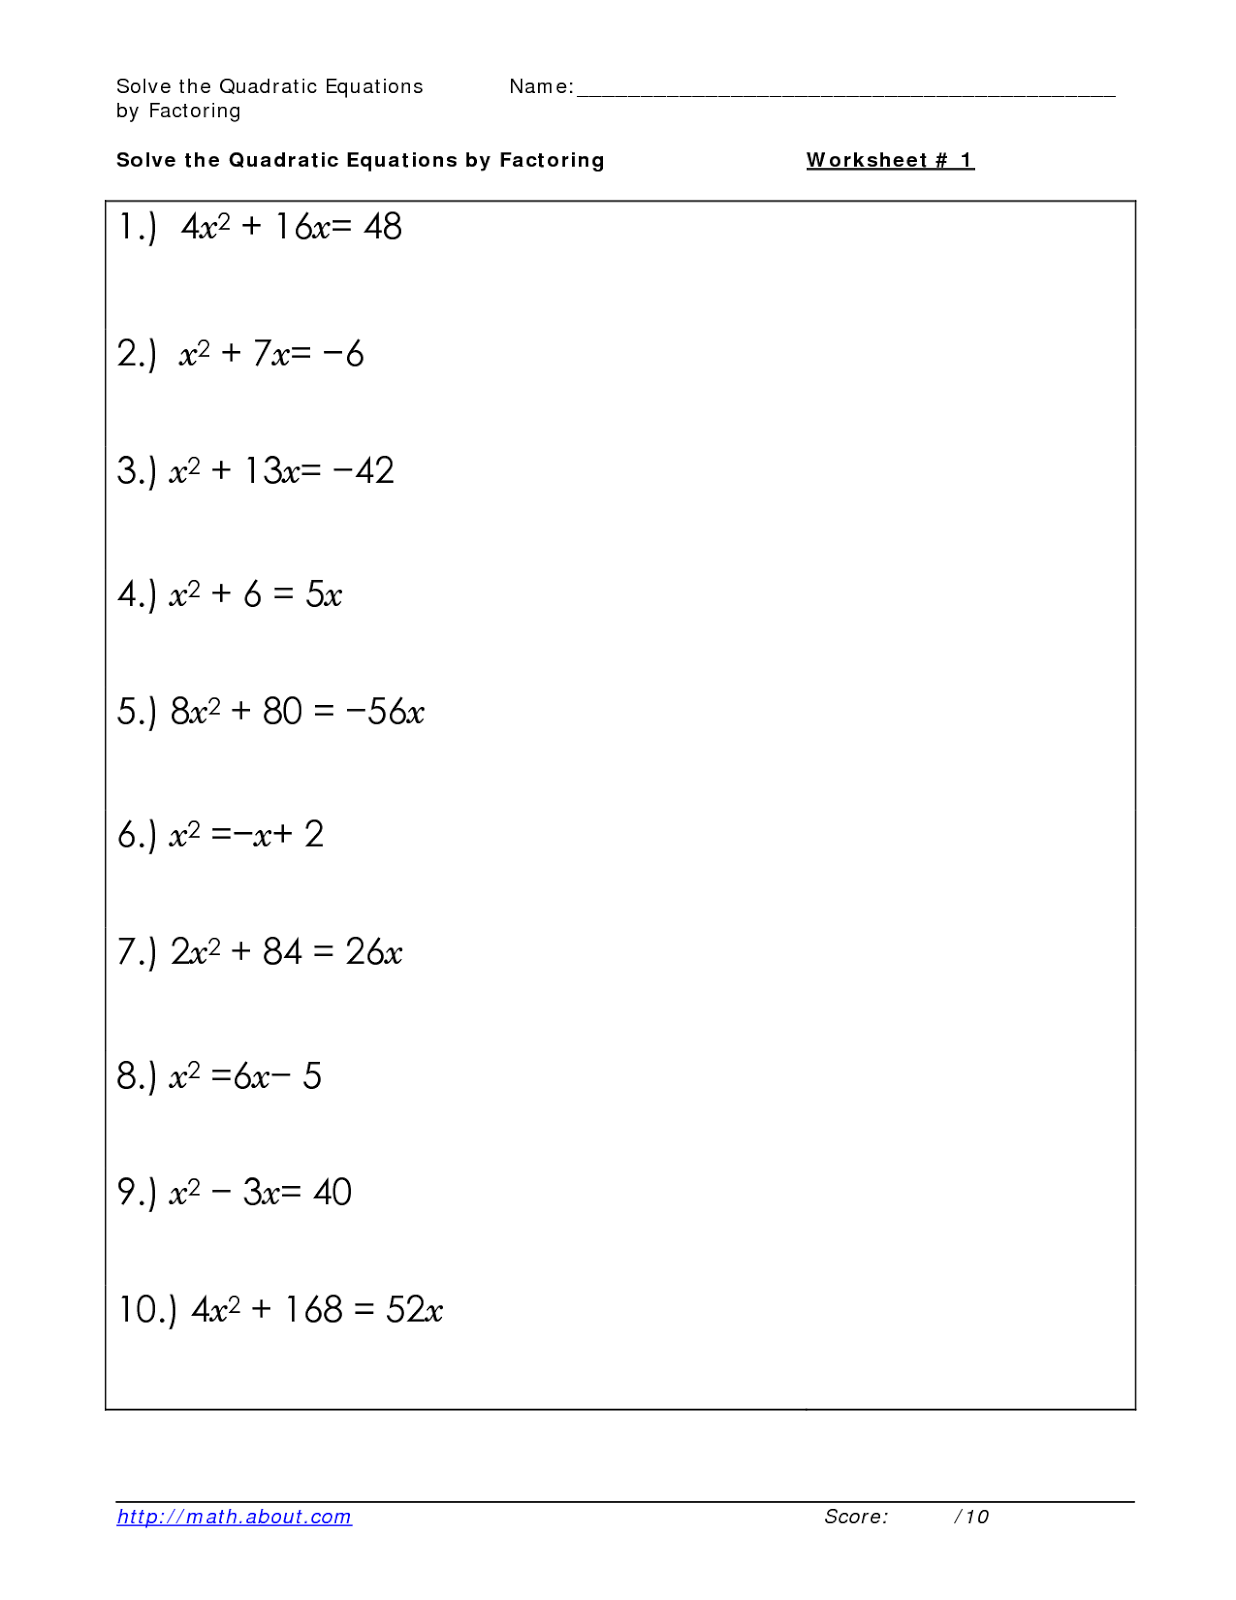 expansion-and-factorisation-of-quadratic-equations